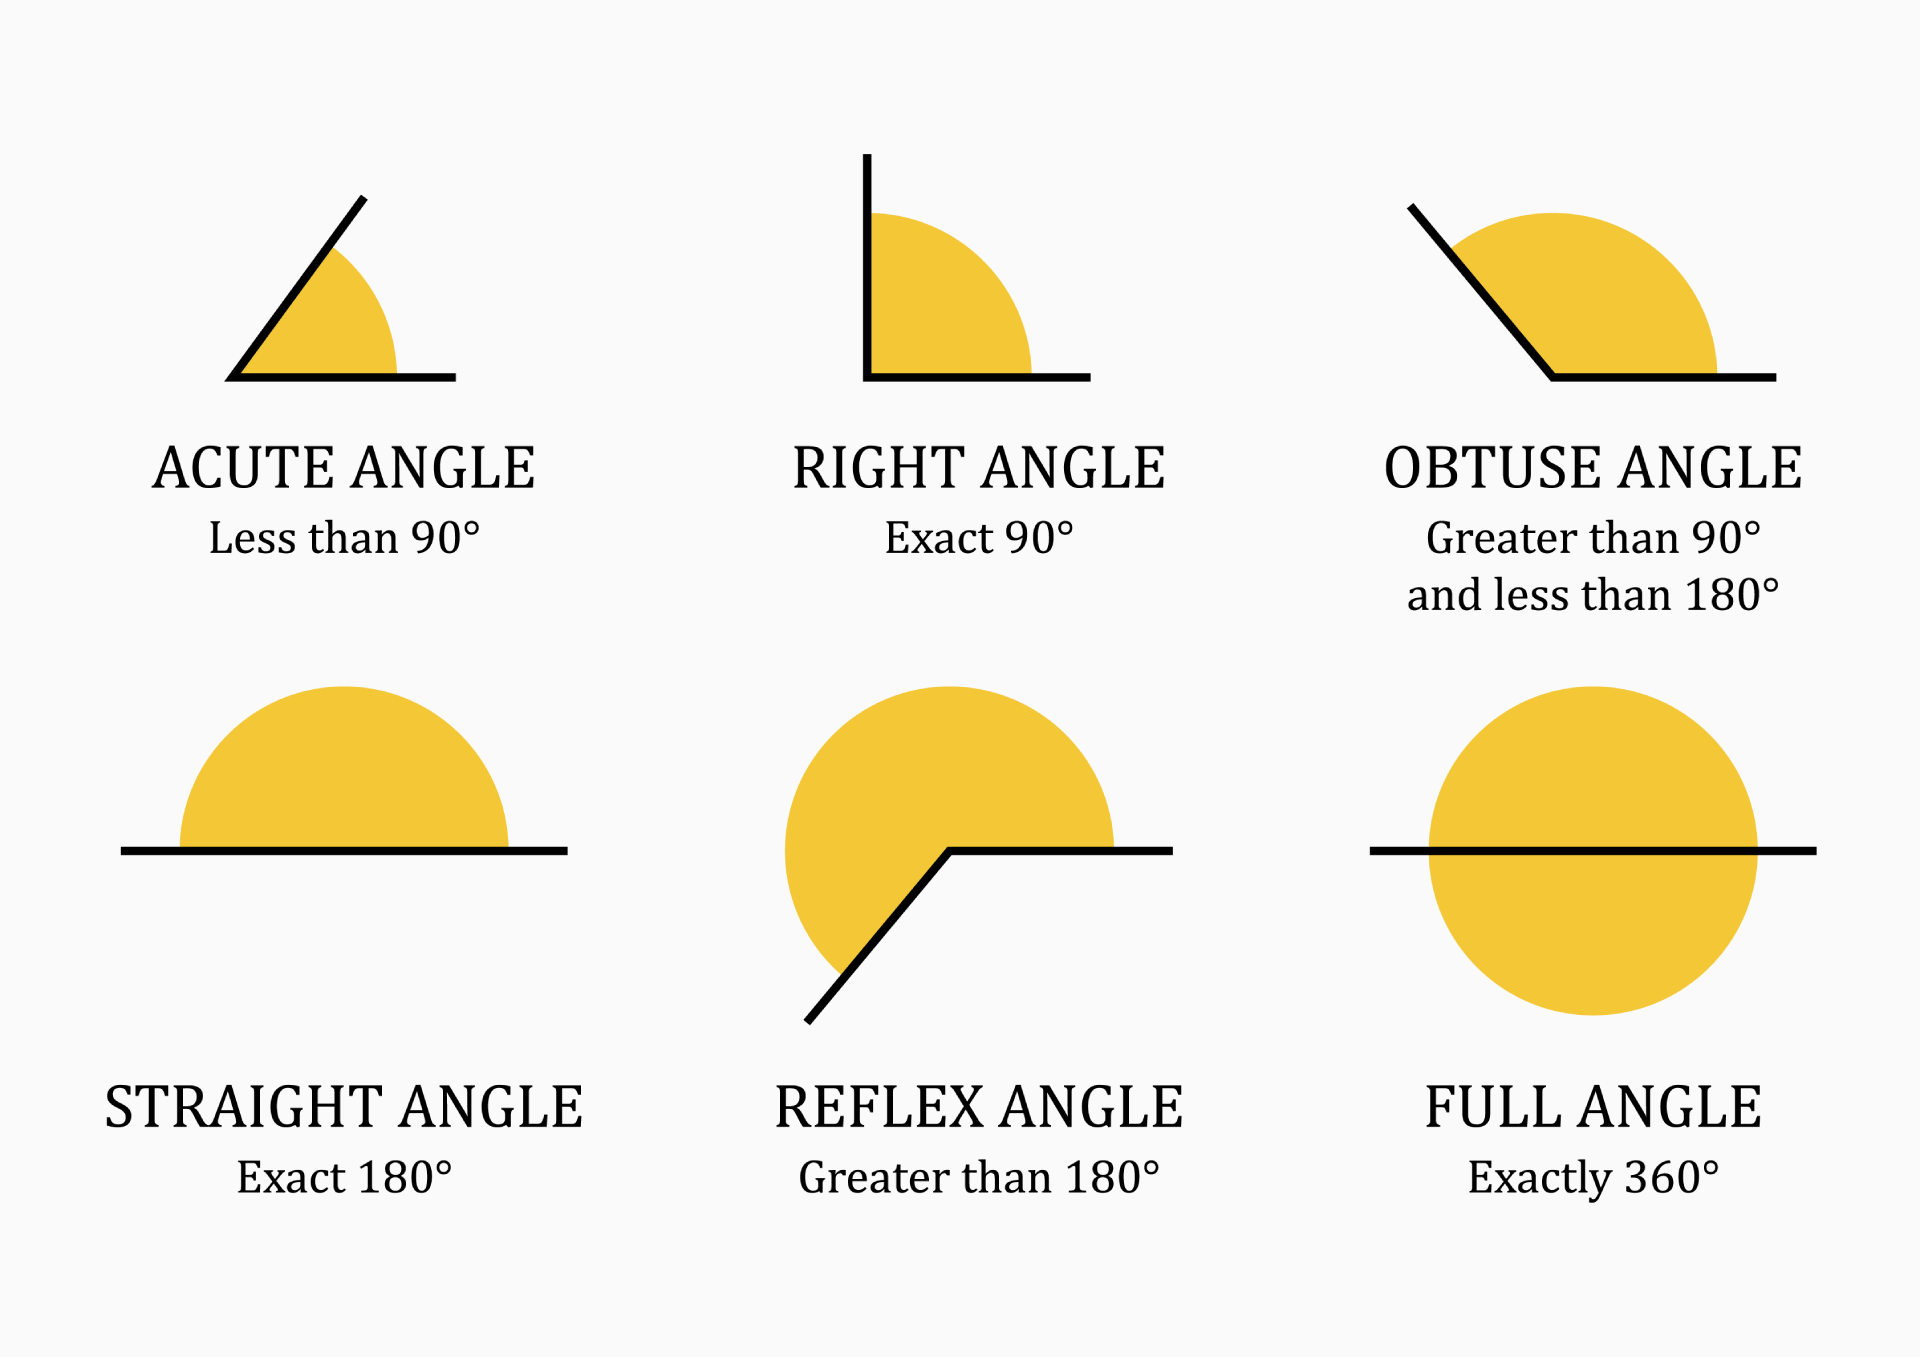 https://calckit.io/tool_assets/conversion/angle/types-of-angles.png